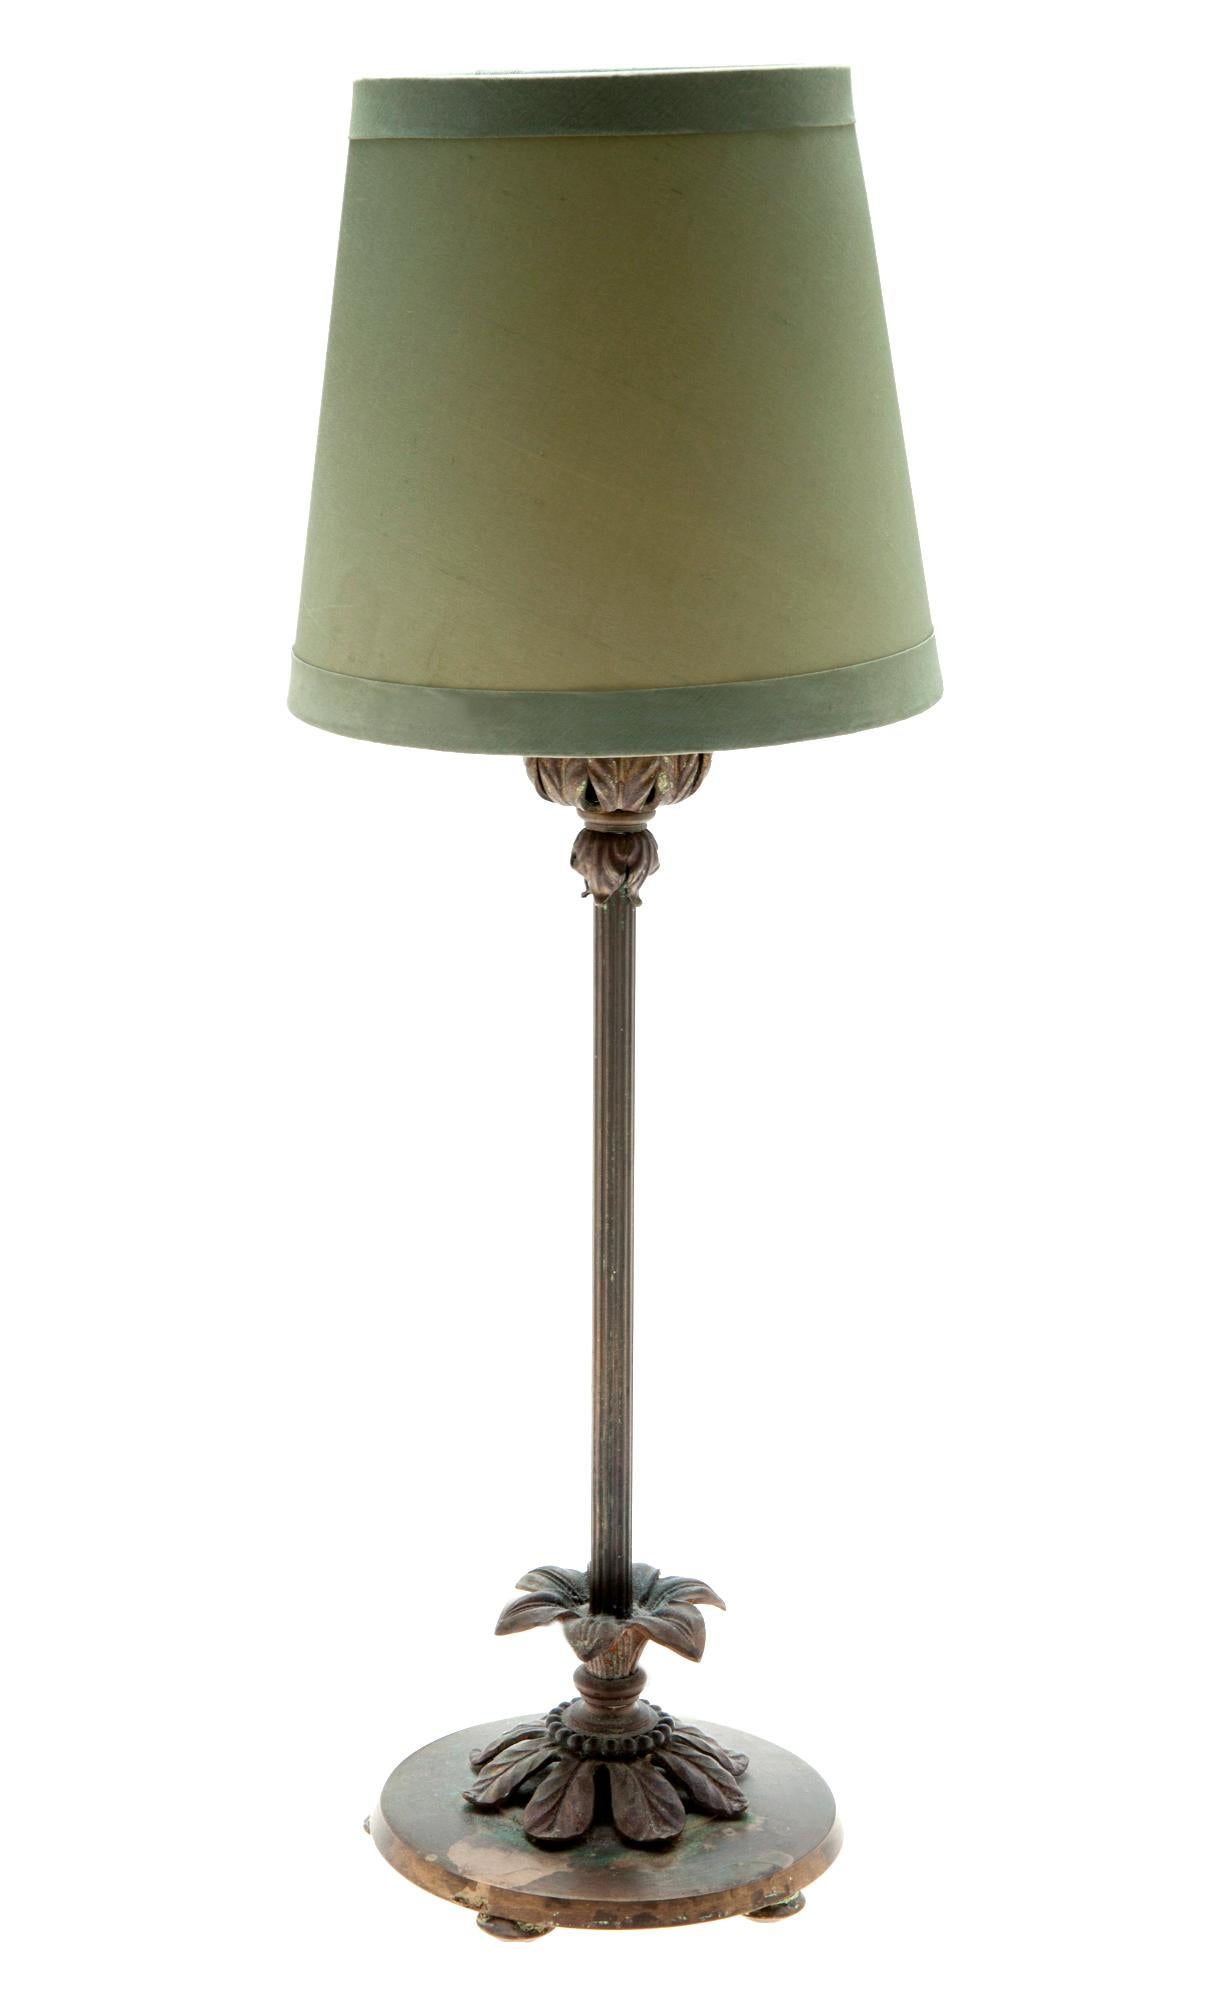 Petite boudoir lamp, circa 1930's. Reeded tubing, original on off switch. Raised on 4 flat feet. Rewired.
Shade Size:
6